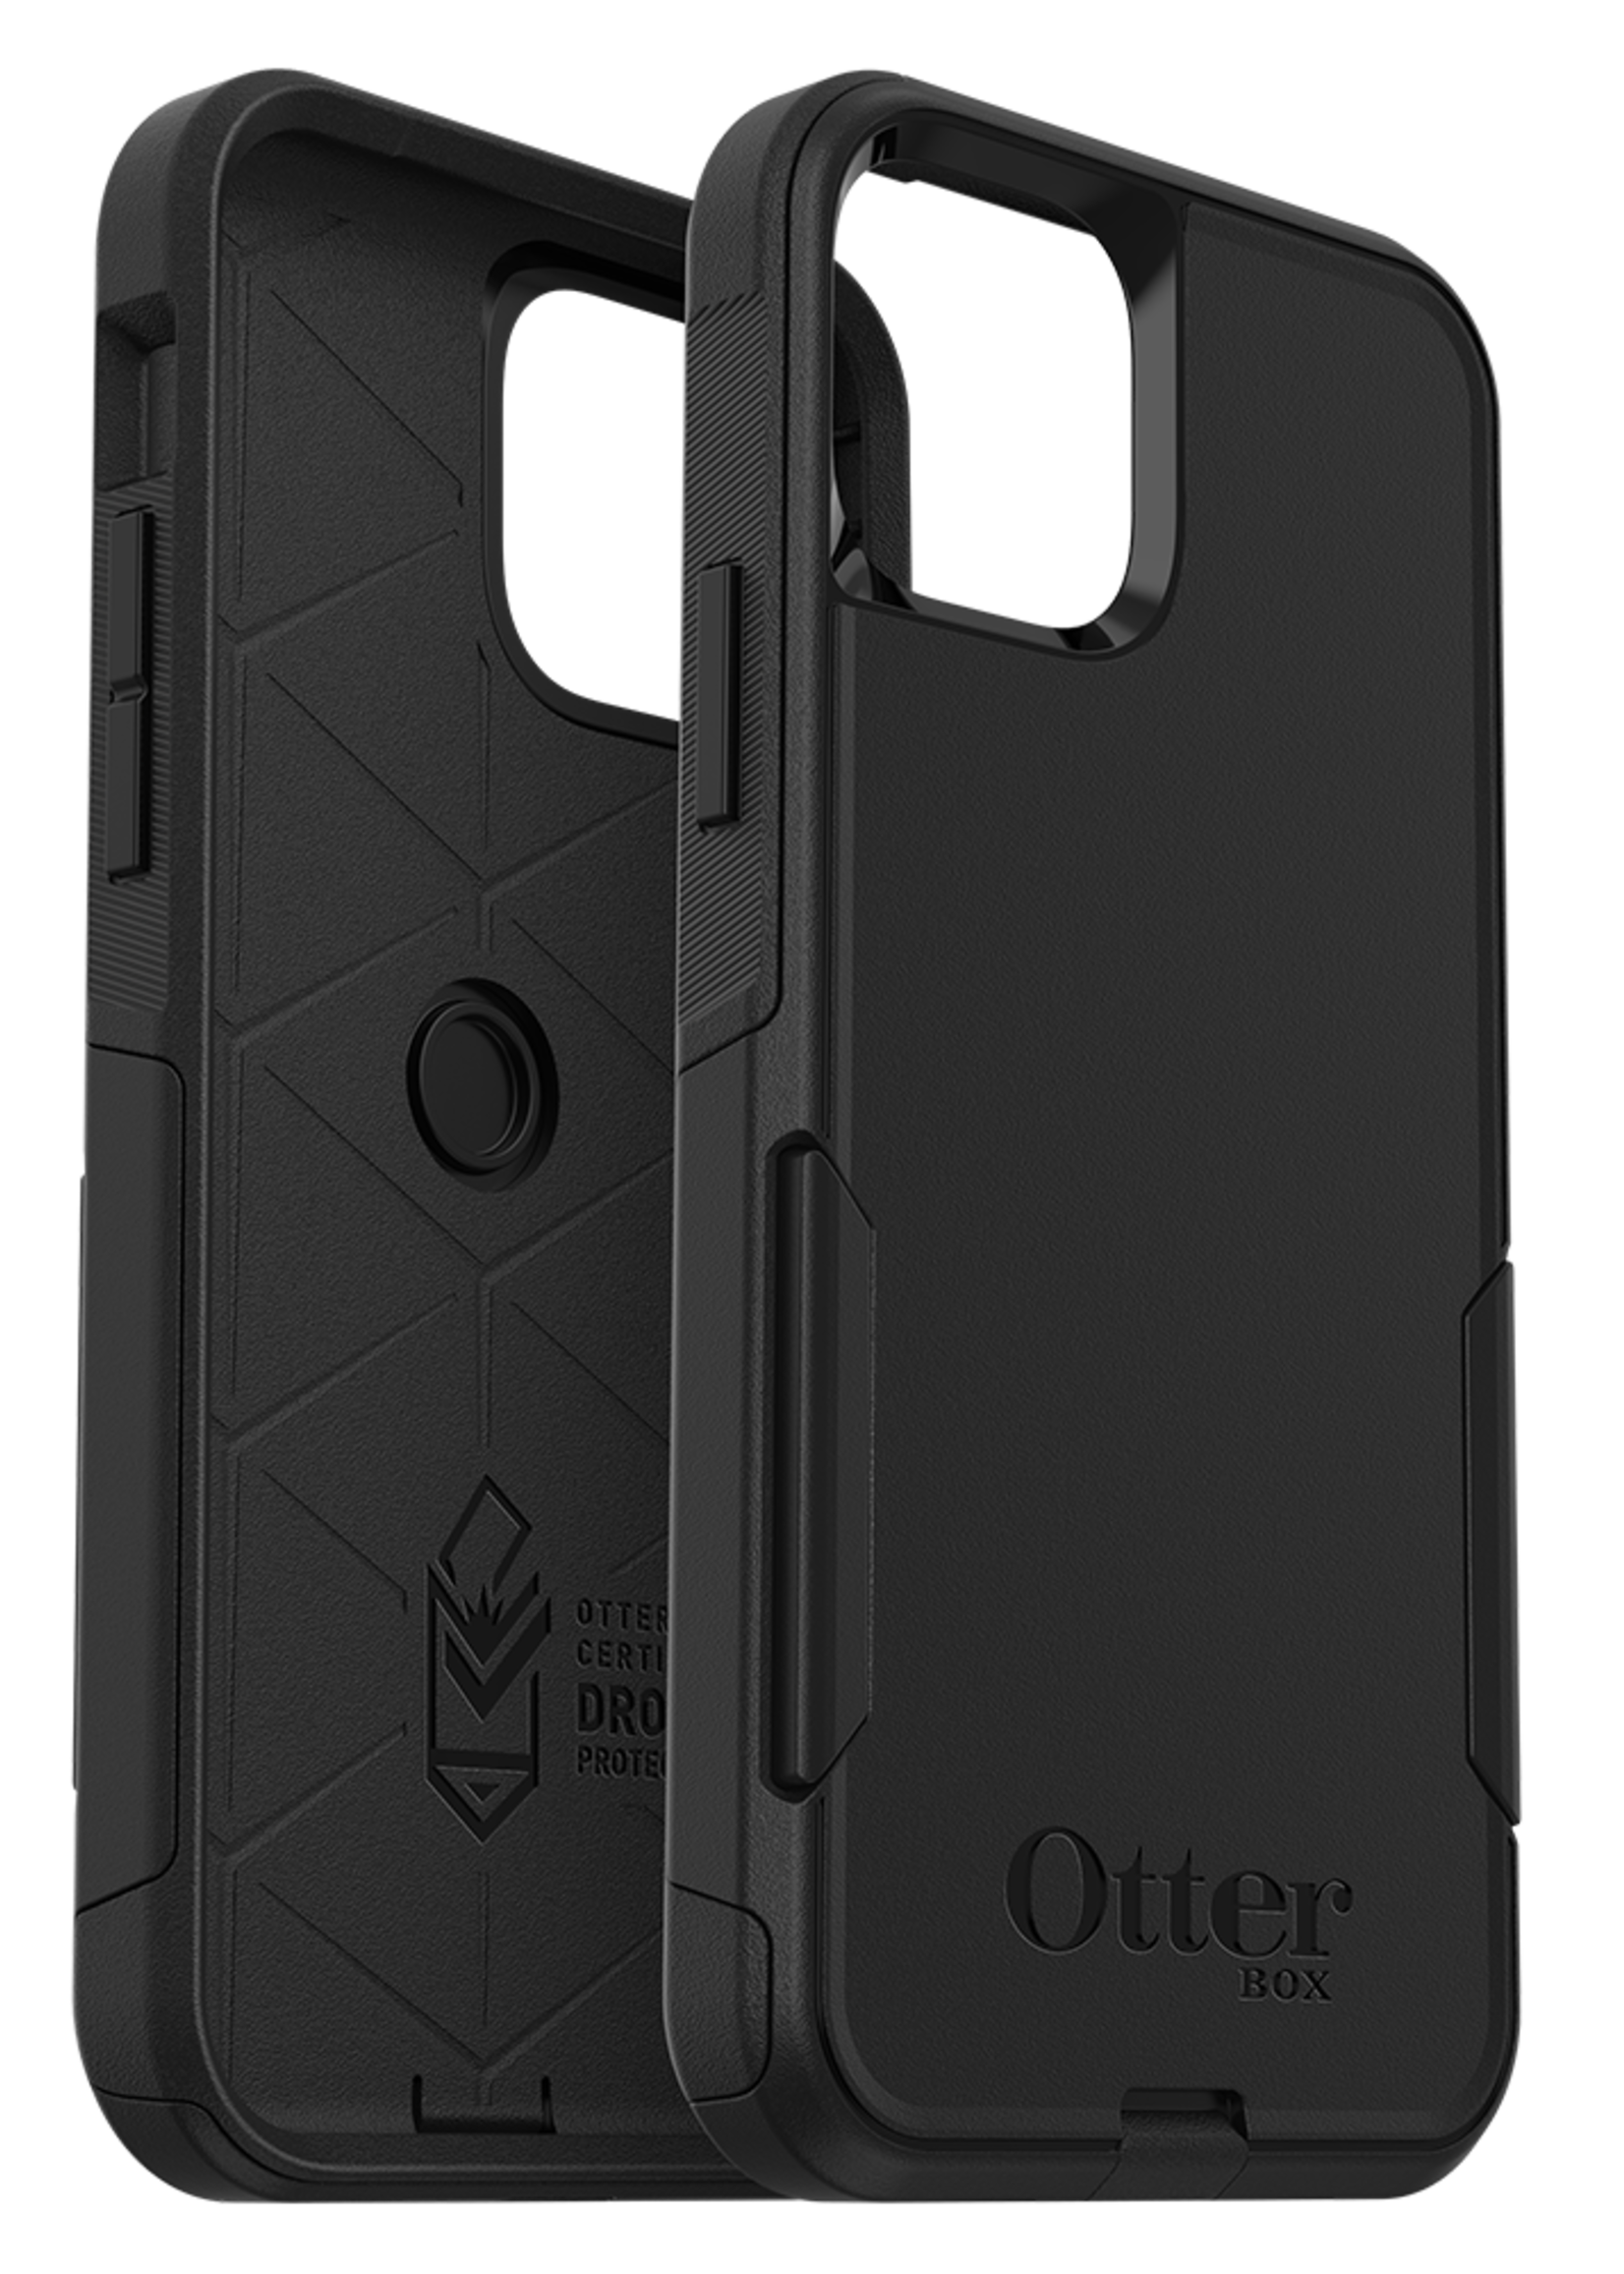 Otterbox OtterBox - Commuter Case for Apple iPhone 11 Pro - Black